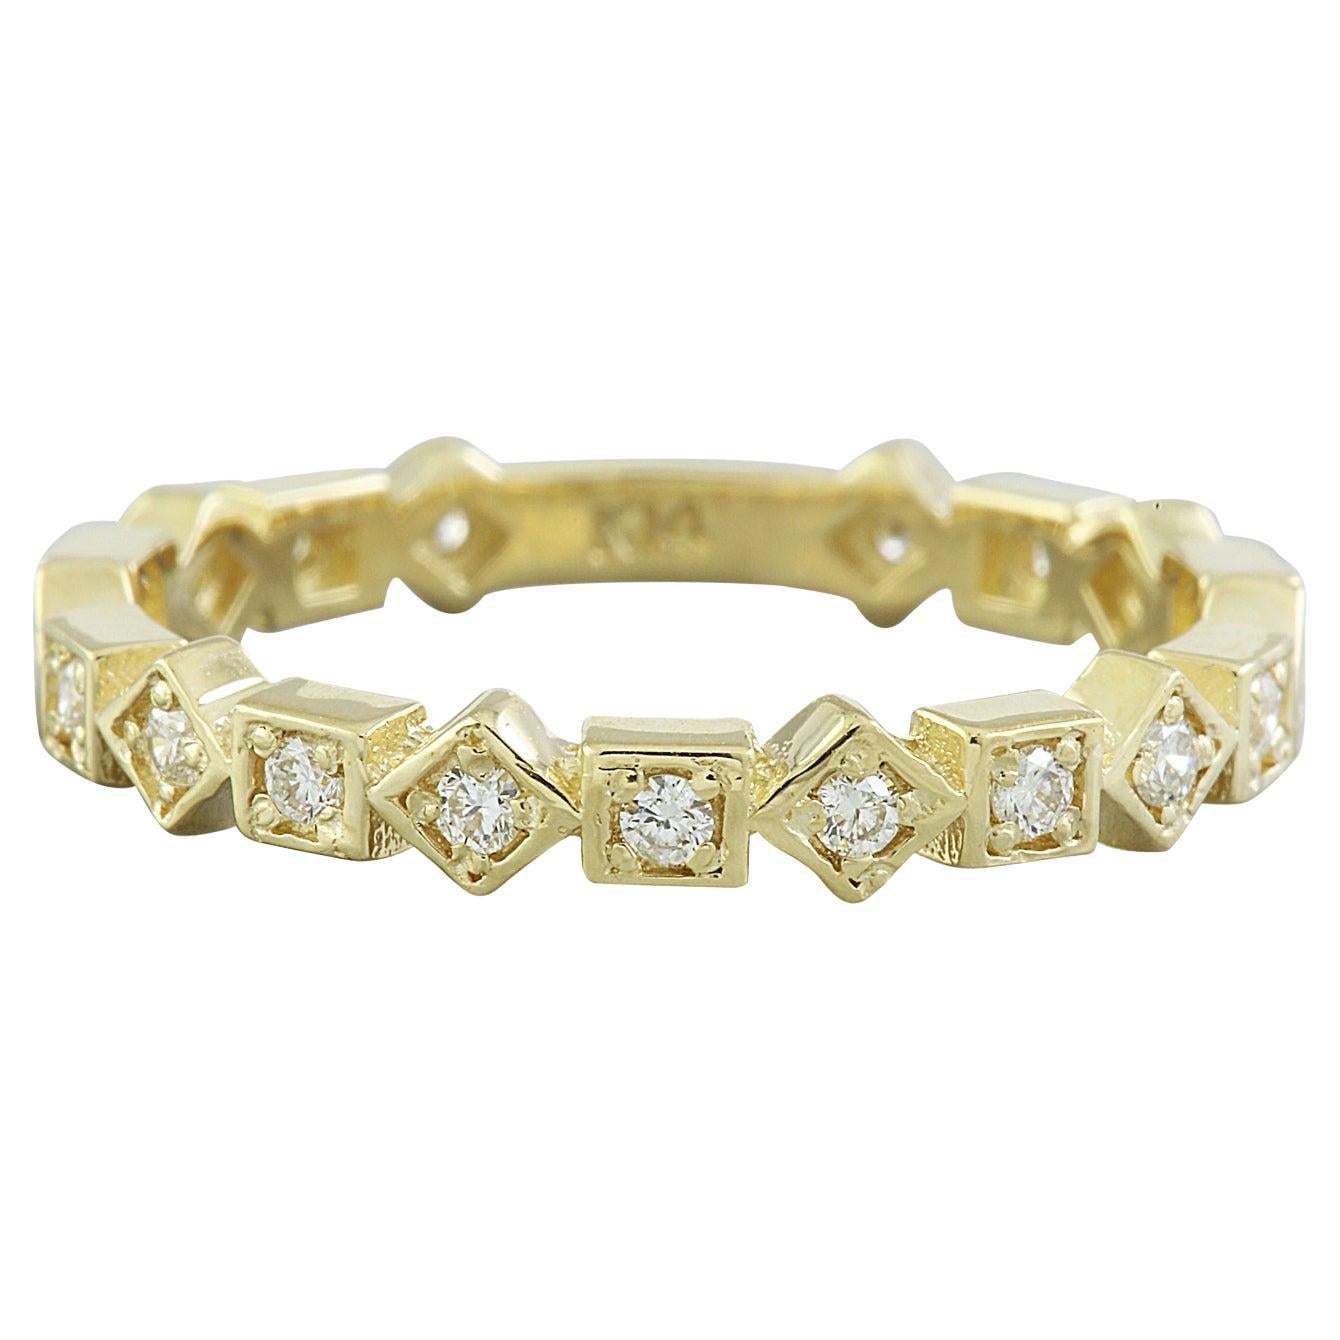 Exquisite Natural Diamond Ring in 14K Solid Yellow Gold